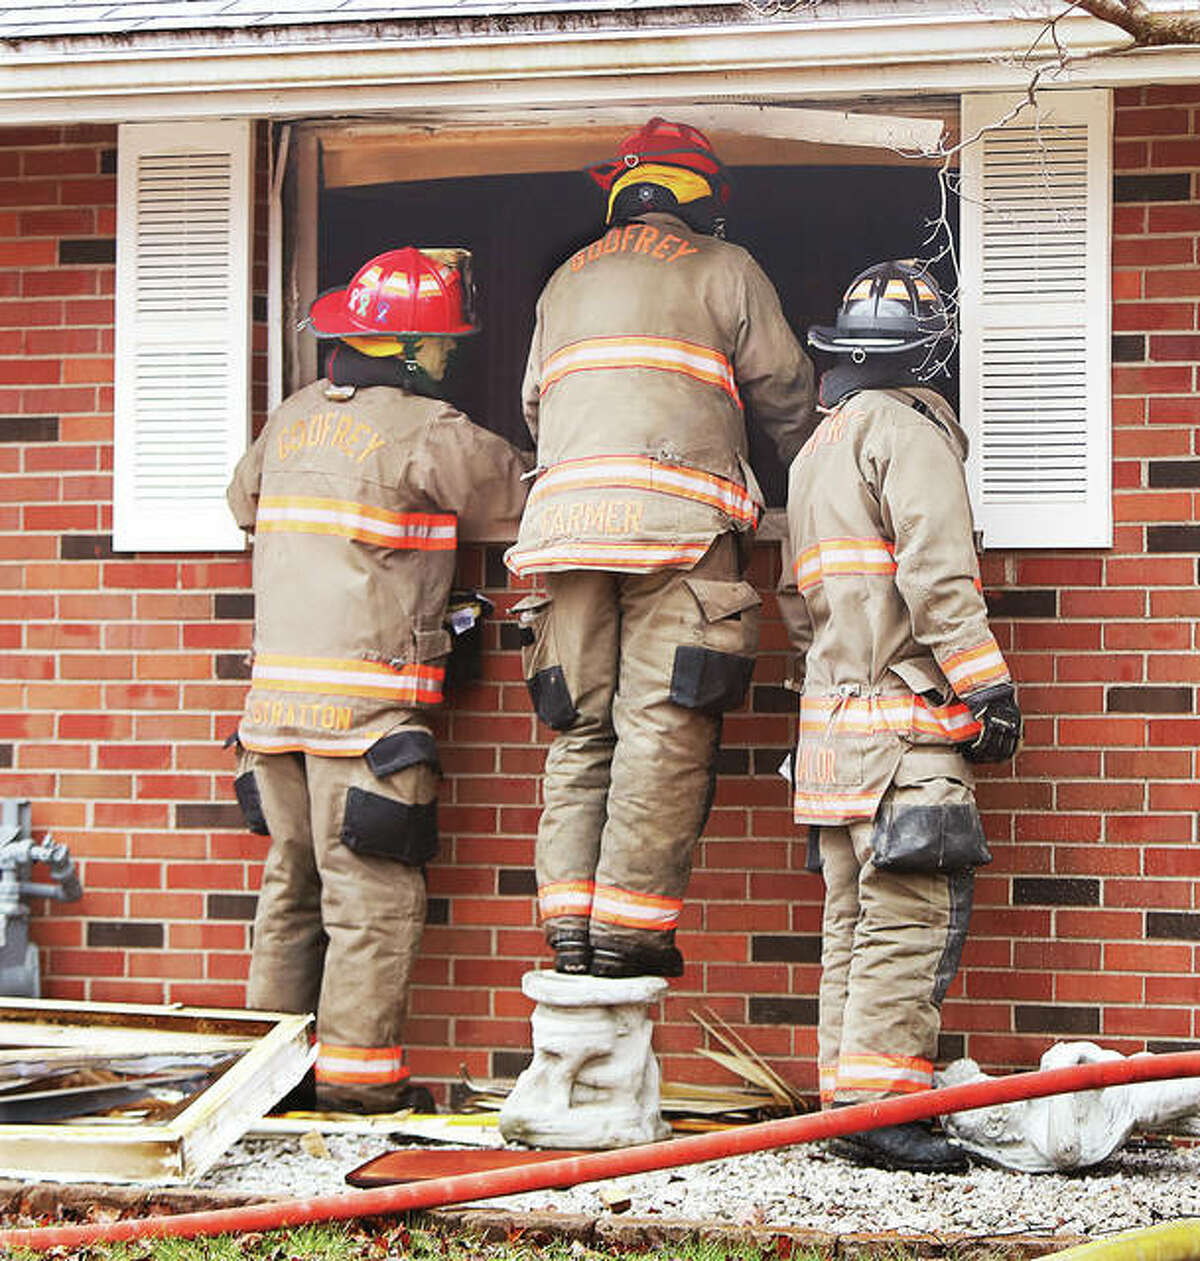 Godfrey firefighters stand and stare through a broken out window into a house Monday morning in the 2300 block of Wedgewood Avenue after extinguishing a fire at that brick home. Firefighters were watching as Illinois State Police Crime Scene investigators and others processed the scene inside where two people were found dead.